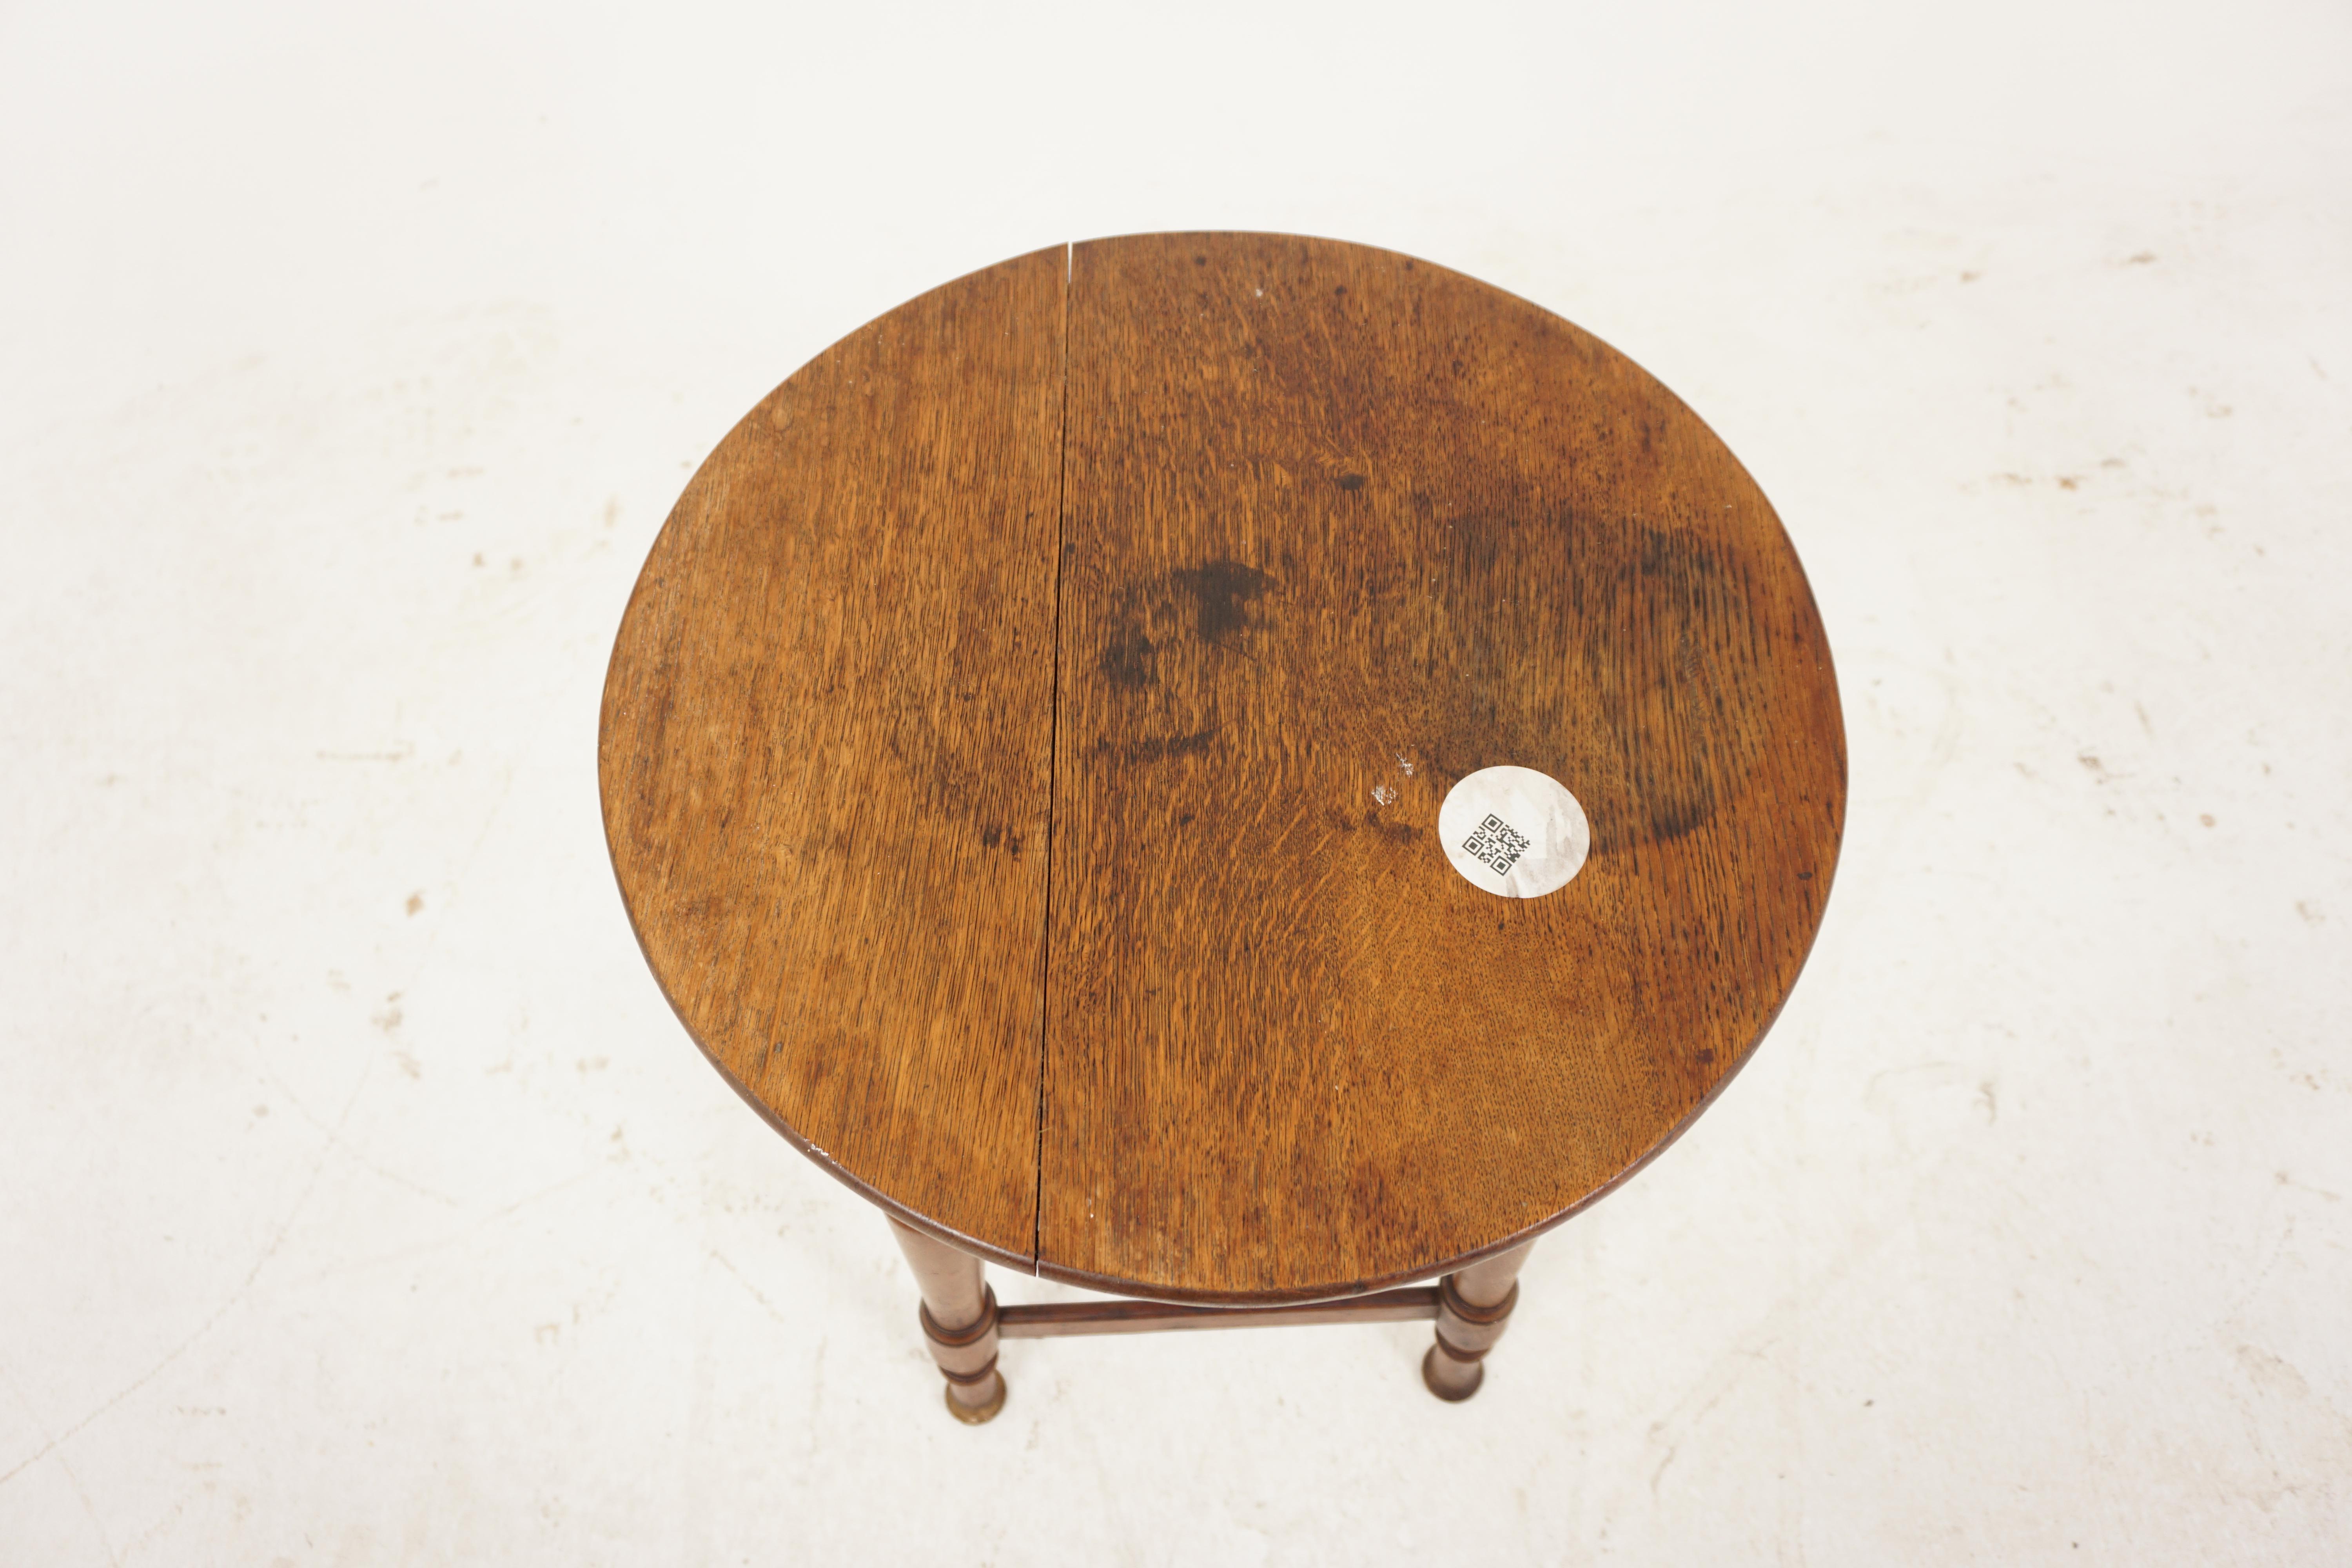 Hand-Crafted Antique Oak Table, Small Circular Plant Stand, Scotland 1920, H1100